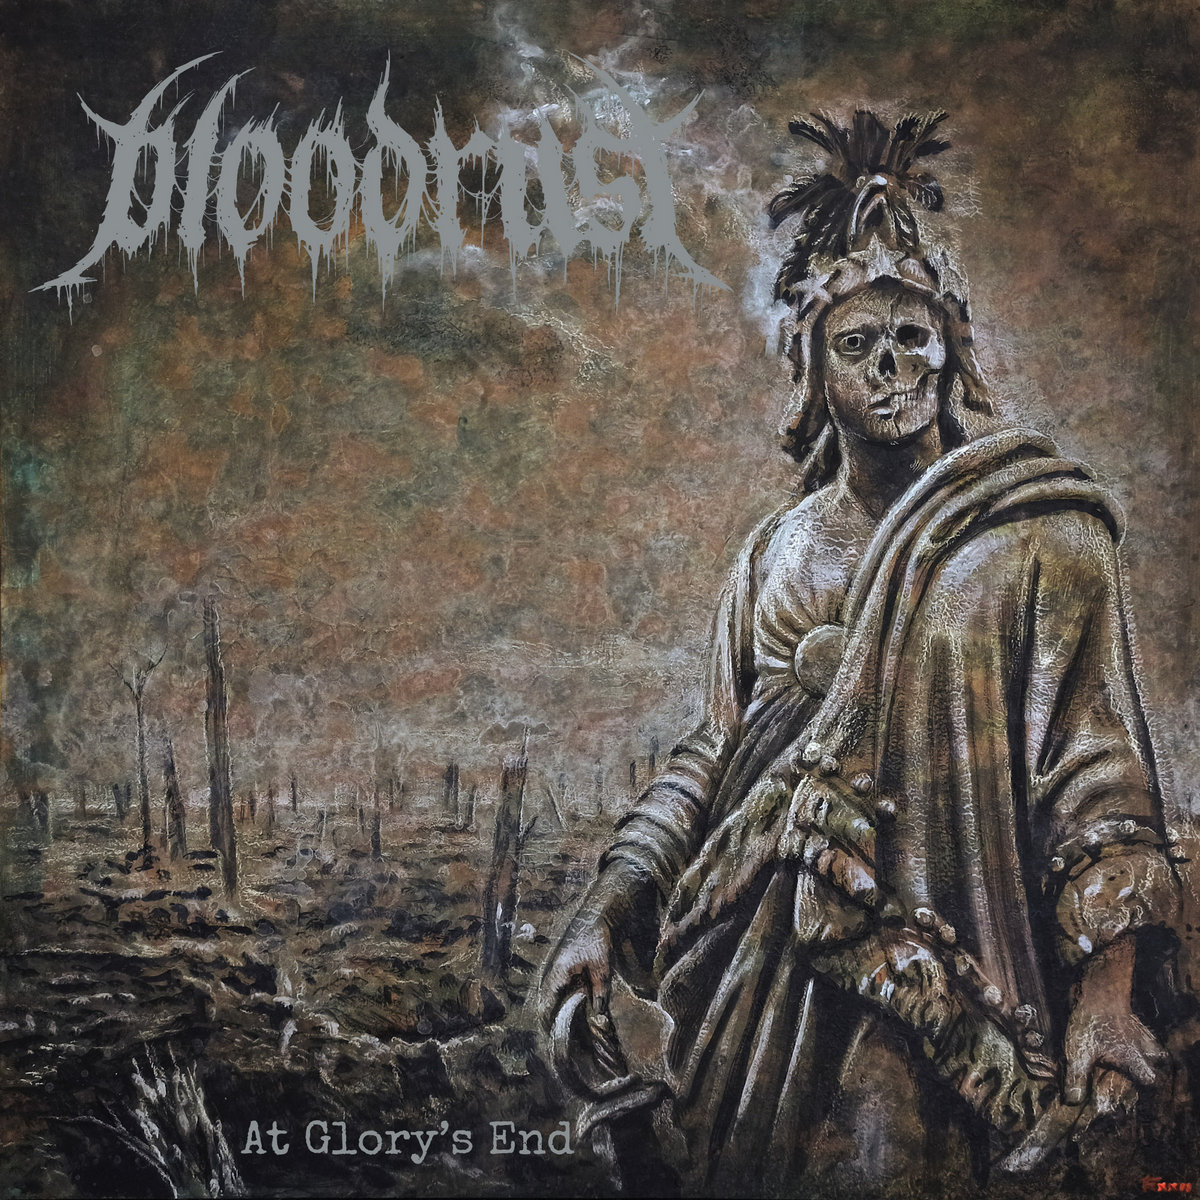 Bloodrust - "At Glory's End" - 2023